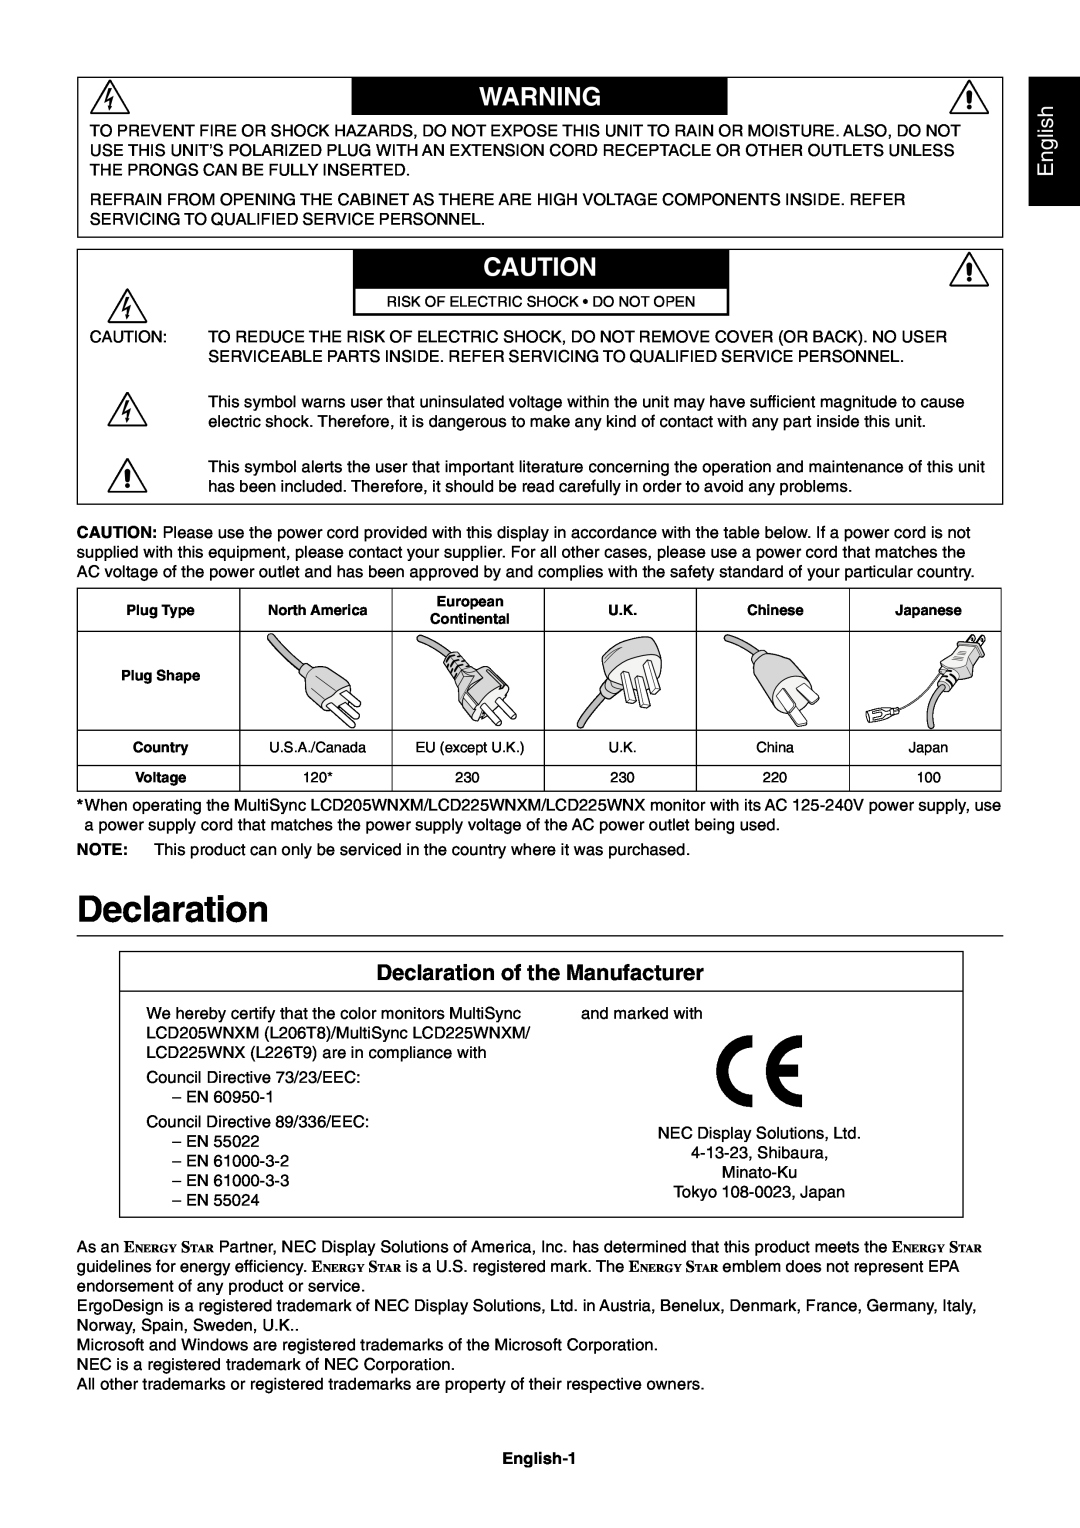 NEC LCD205WNXM, LCD225WNXM user manual English, Declaration of the Manufacturer 